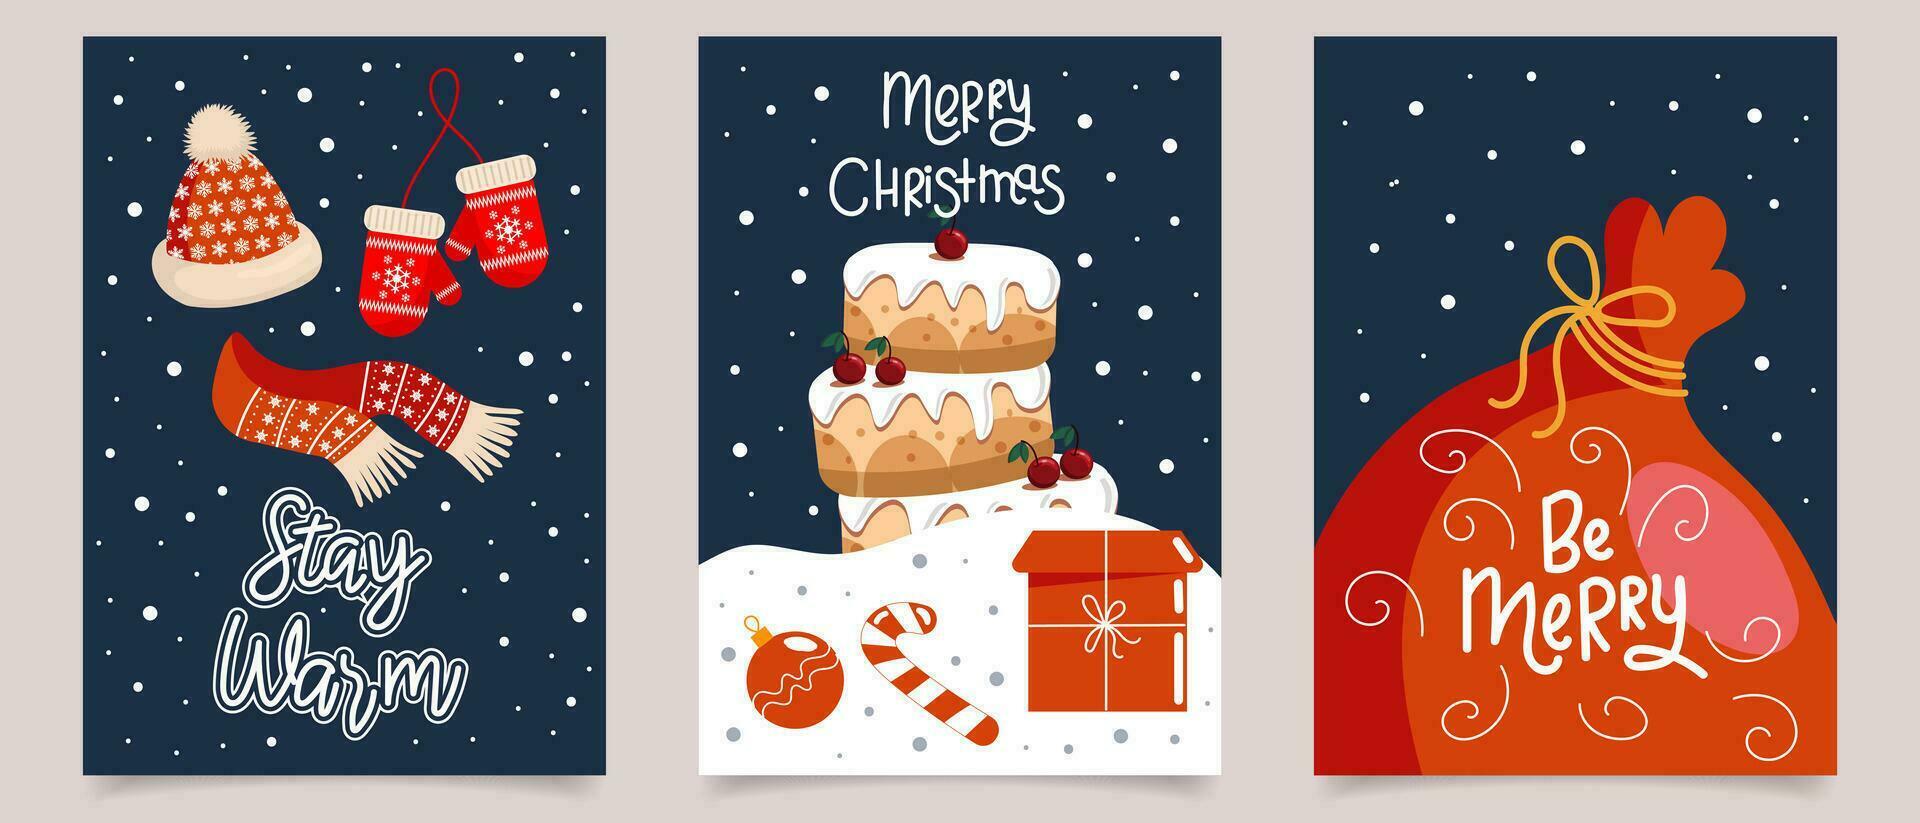 Be merry and bright - Christmas quotes typographic design vector